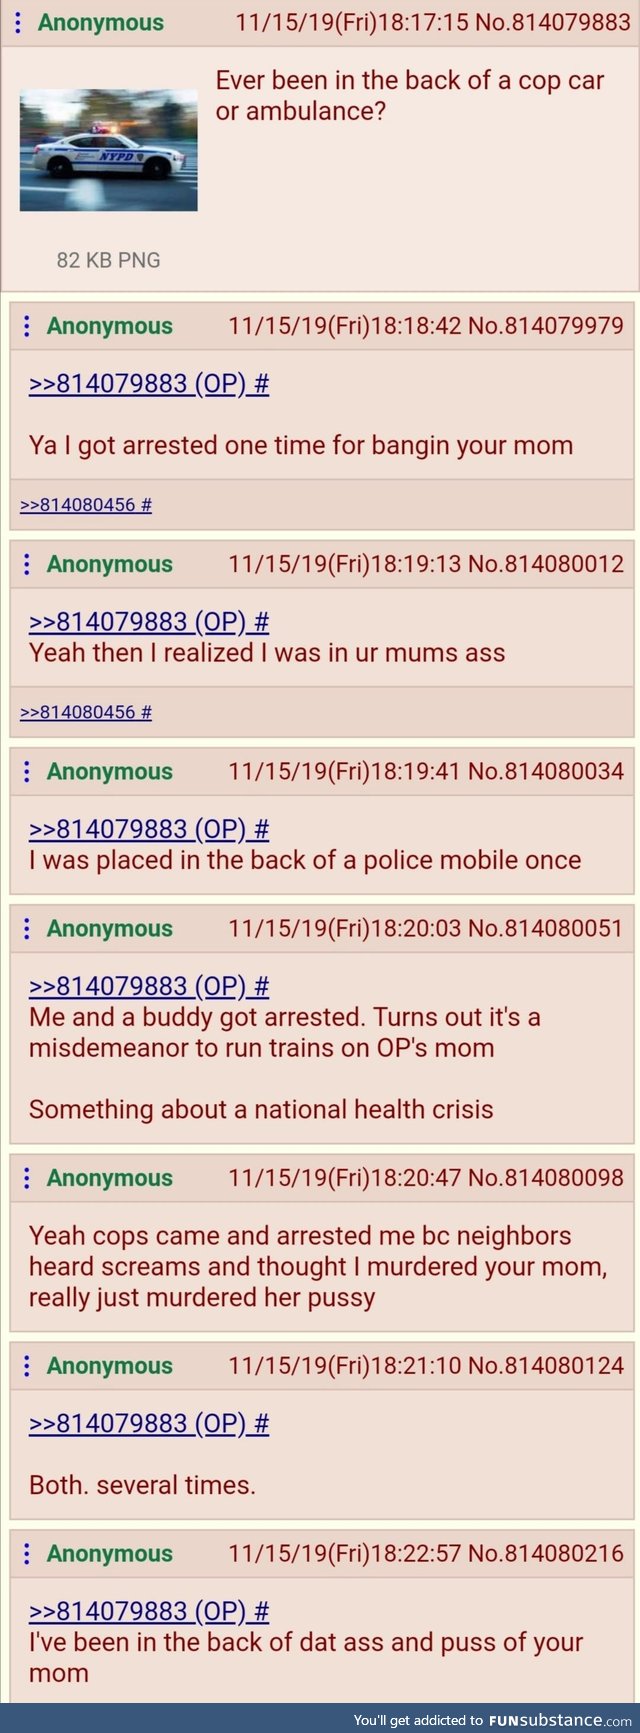 Anon has a question